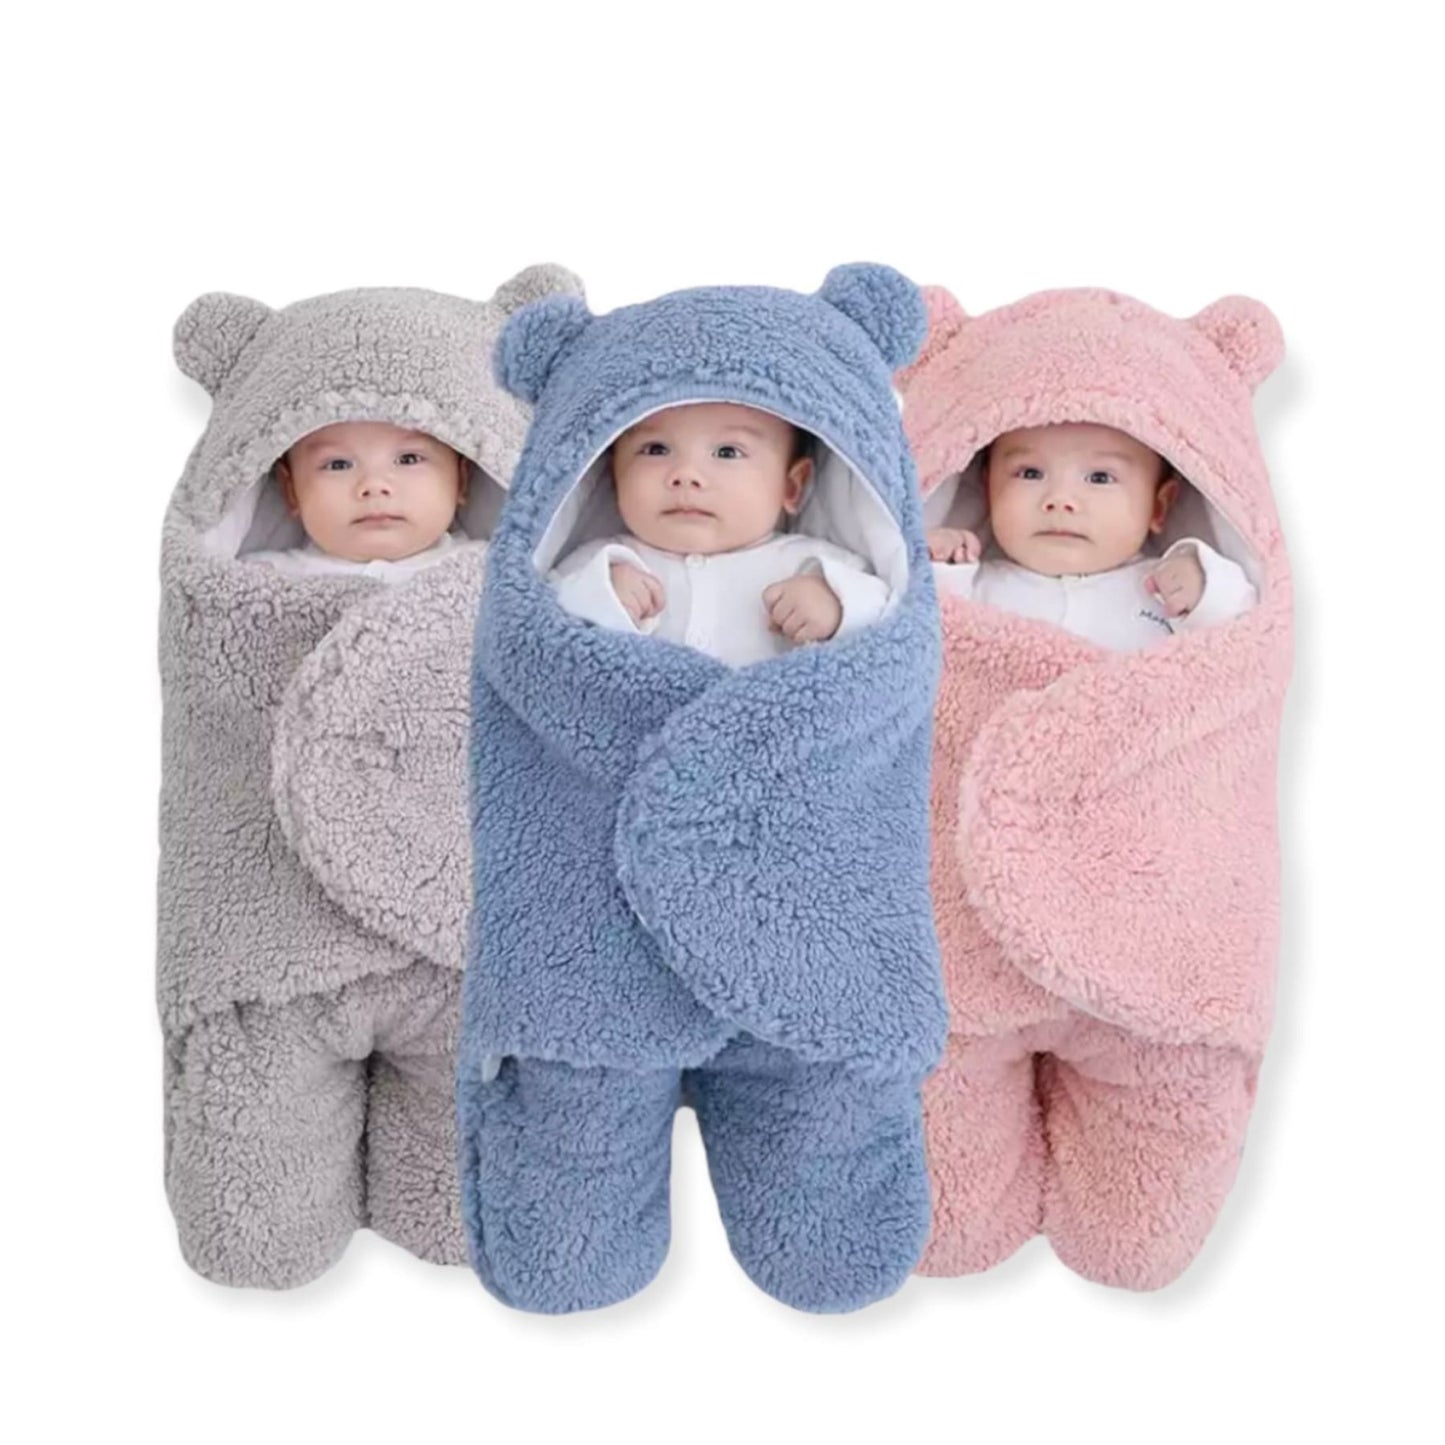 set of three baby sleeping bags and swaddles for winter - hunny bubba kids